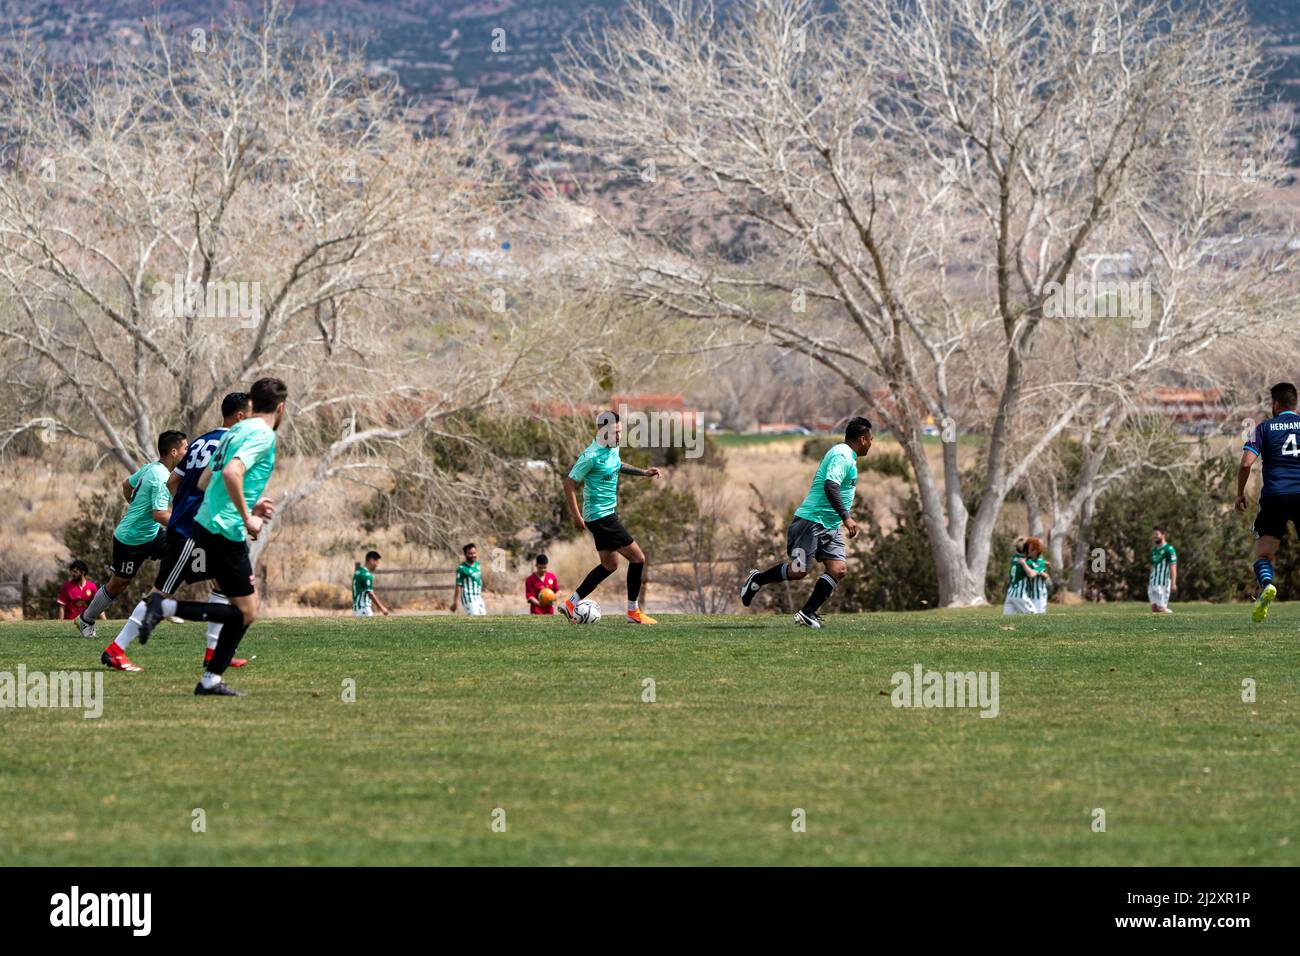 Playing soccer in Bernalillo, New Mexico Stock Photo